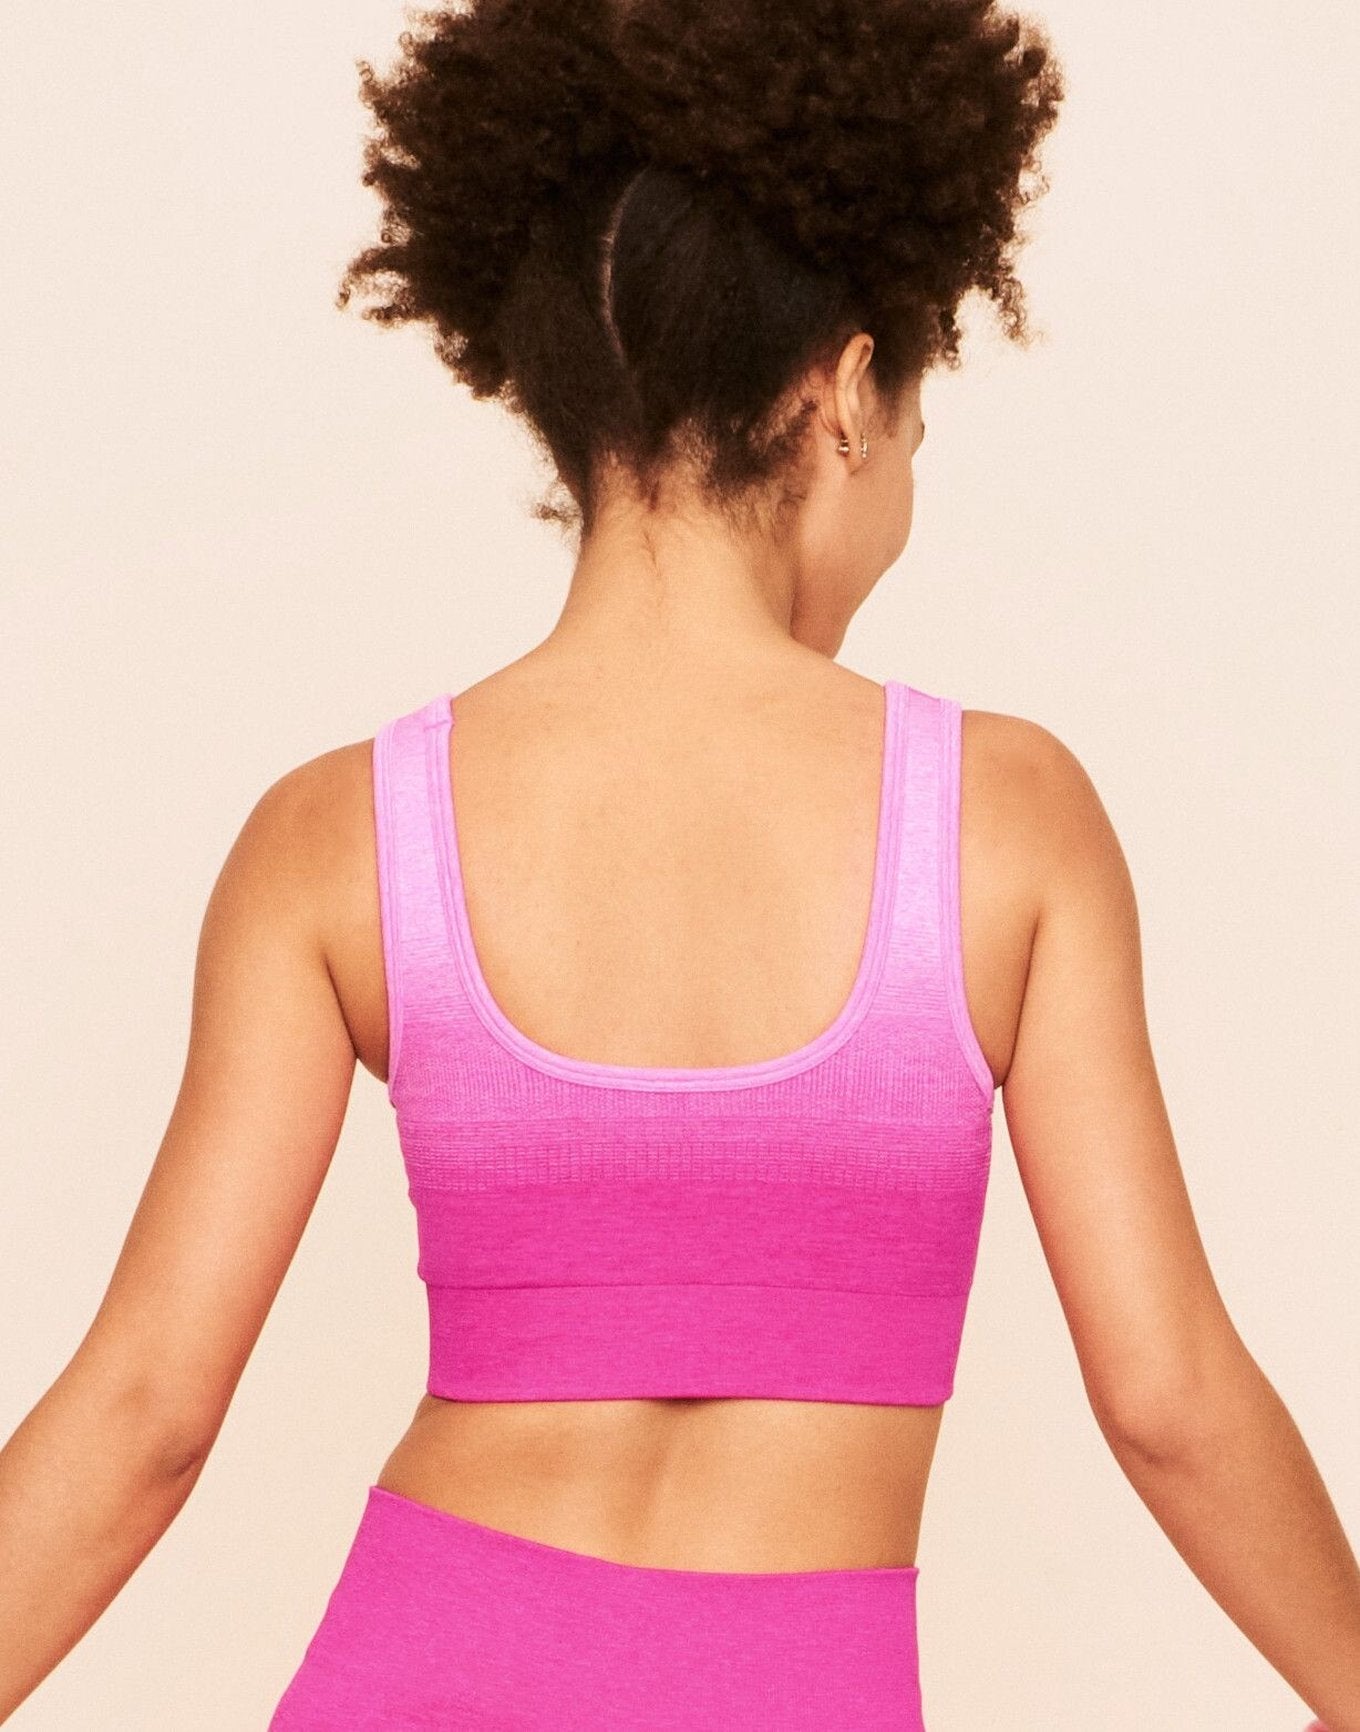 Earth Republic Maeve Ombre Sports Bra Sports Bra in color Solid 03 - Ombre Pink and shape sports bra